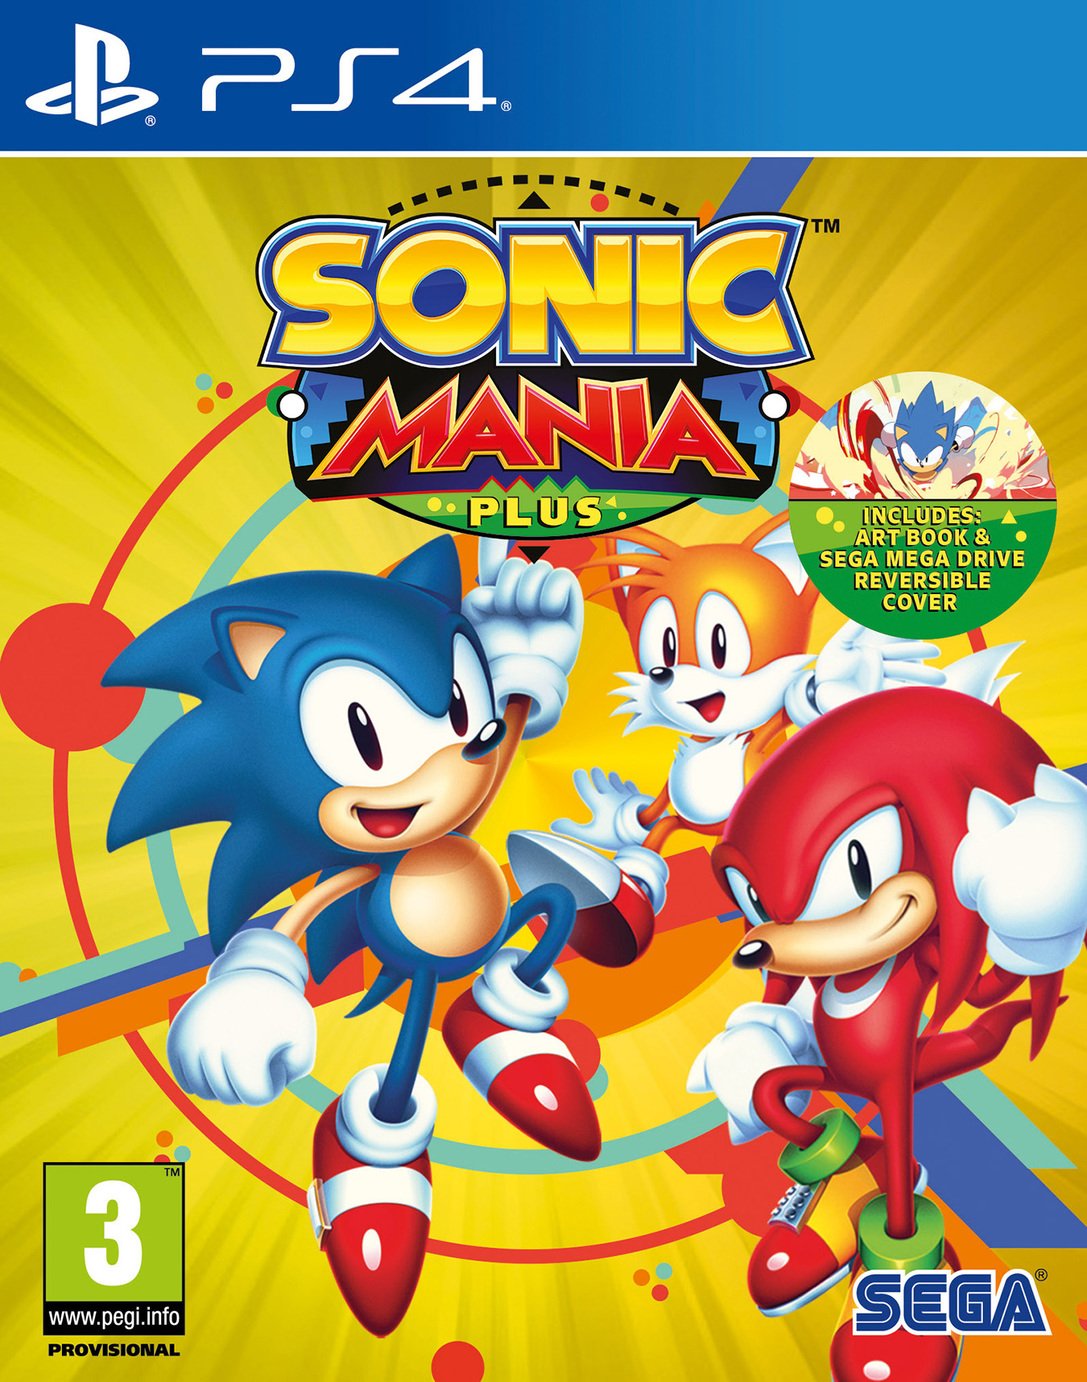 sonic-mania-plus-ps4-game-reviews